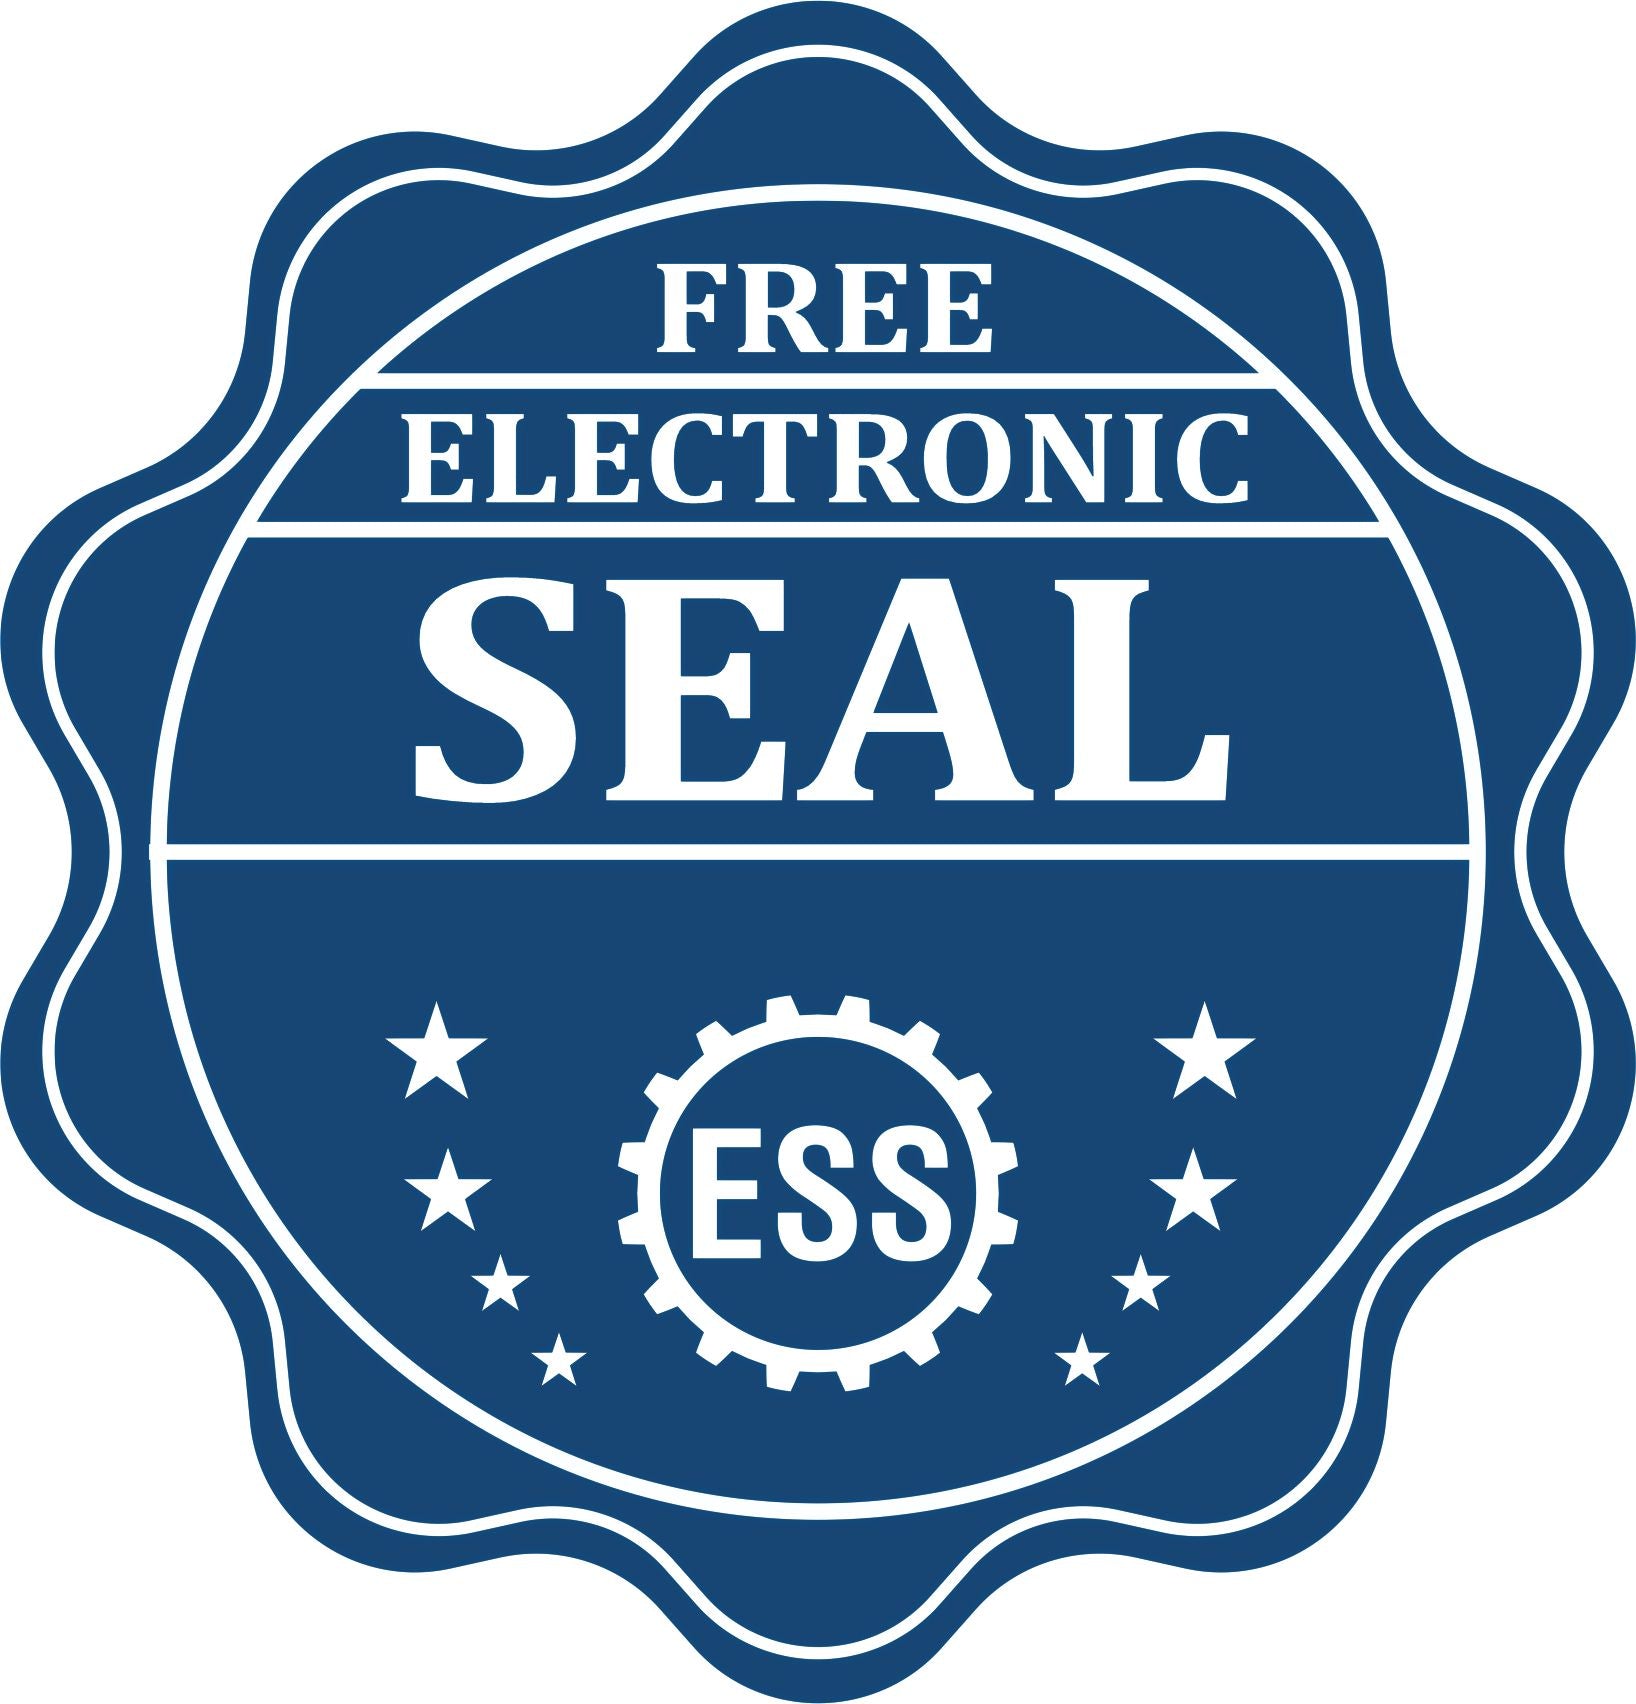 A badge showing a free electronic seal for the State of Mississippi Long Reach Architectural Embossing Seal with stars and the ESS gear on the emblem.